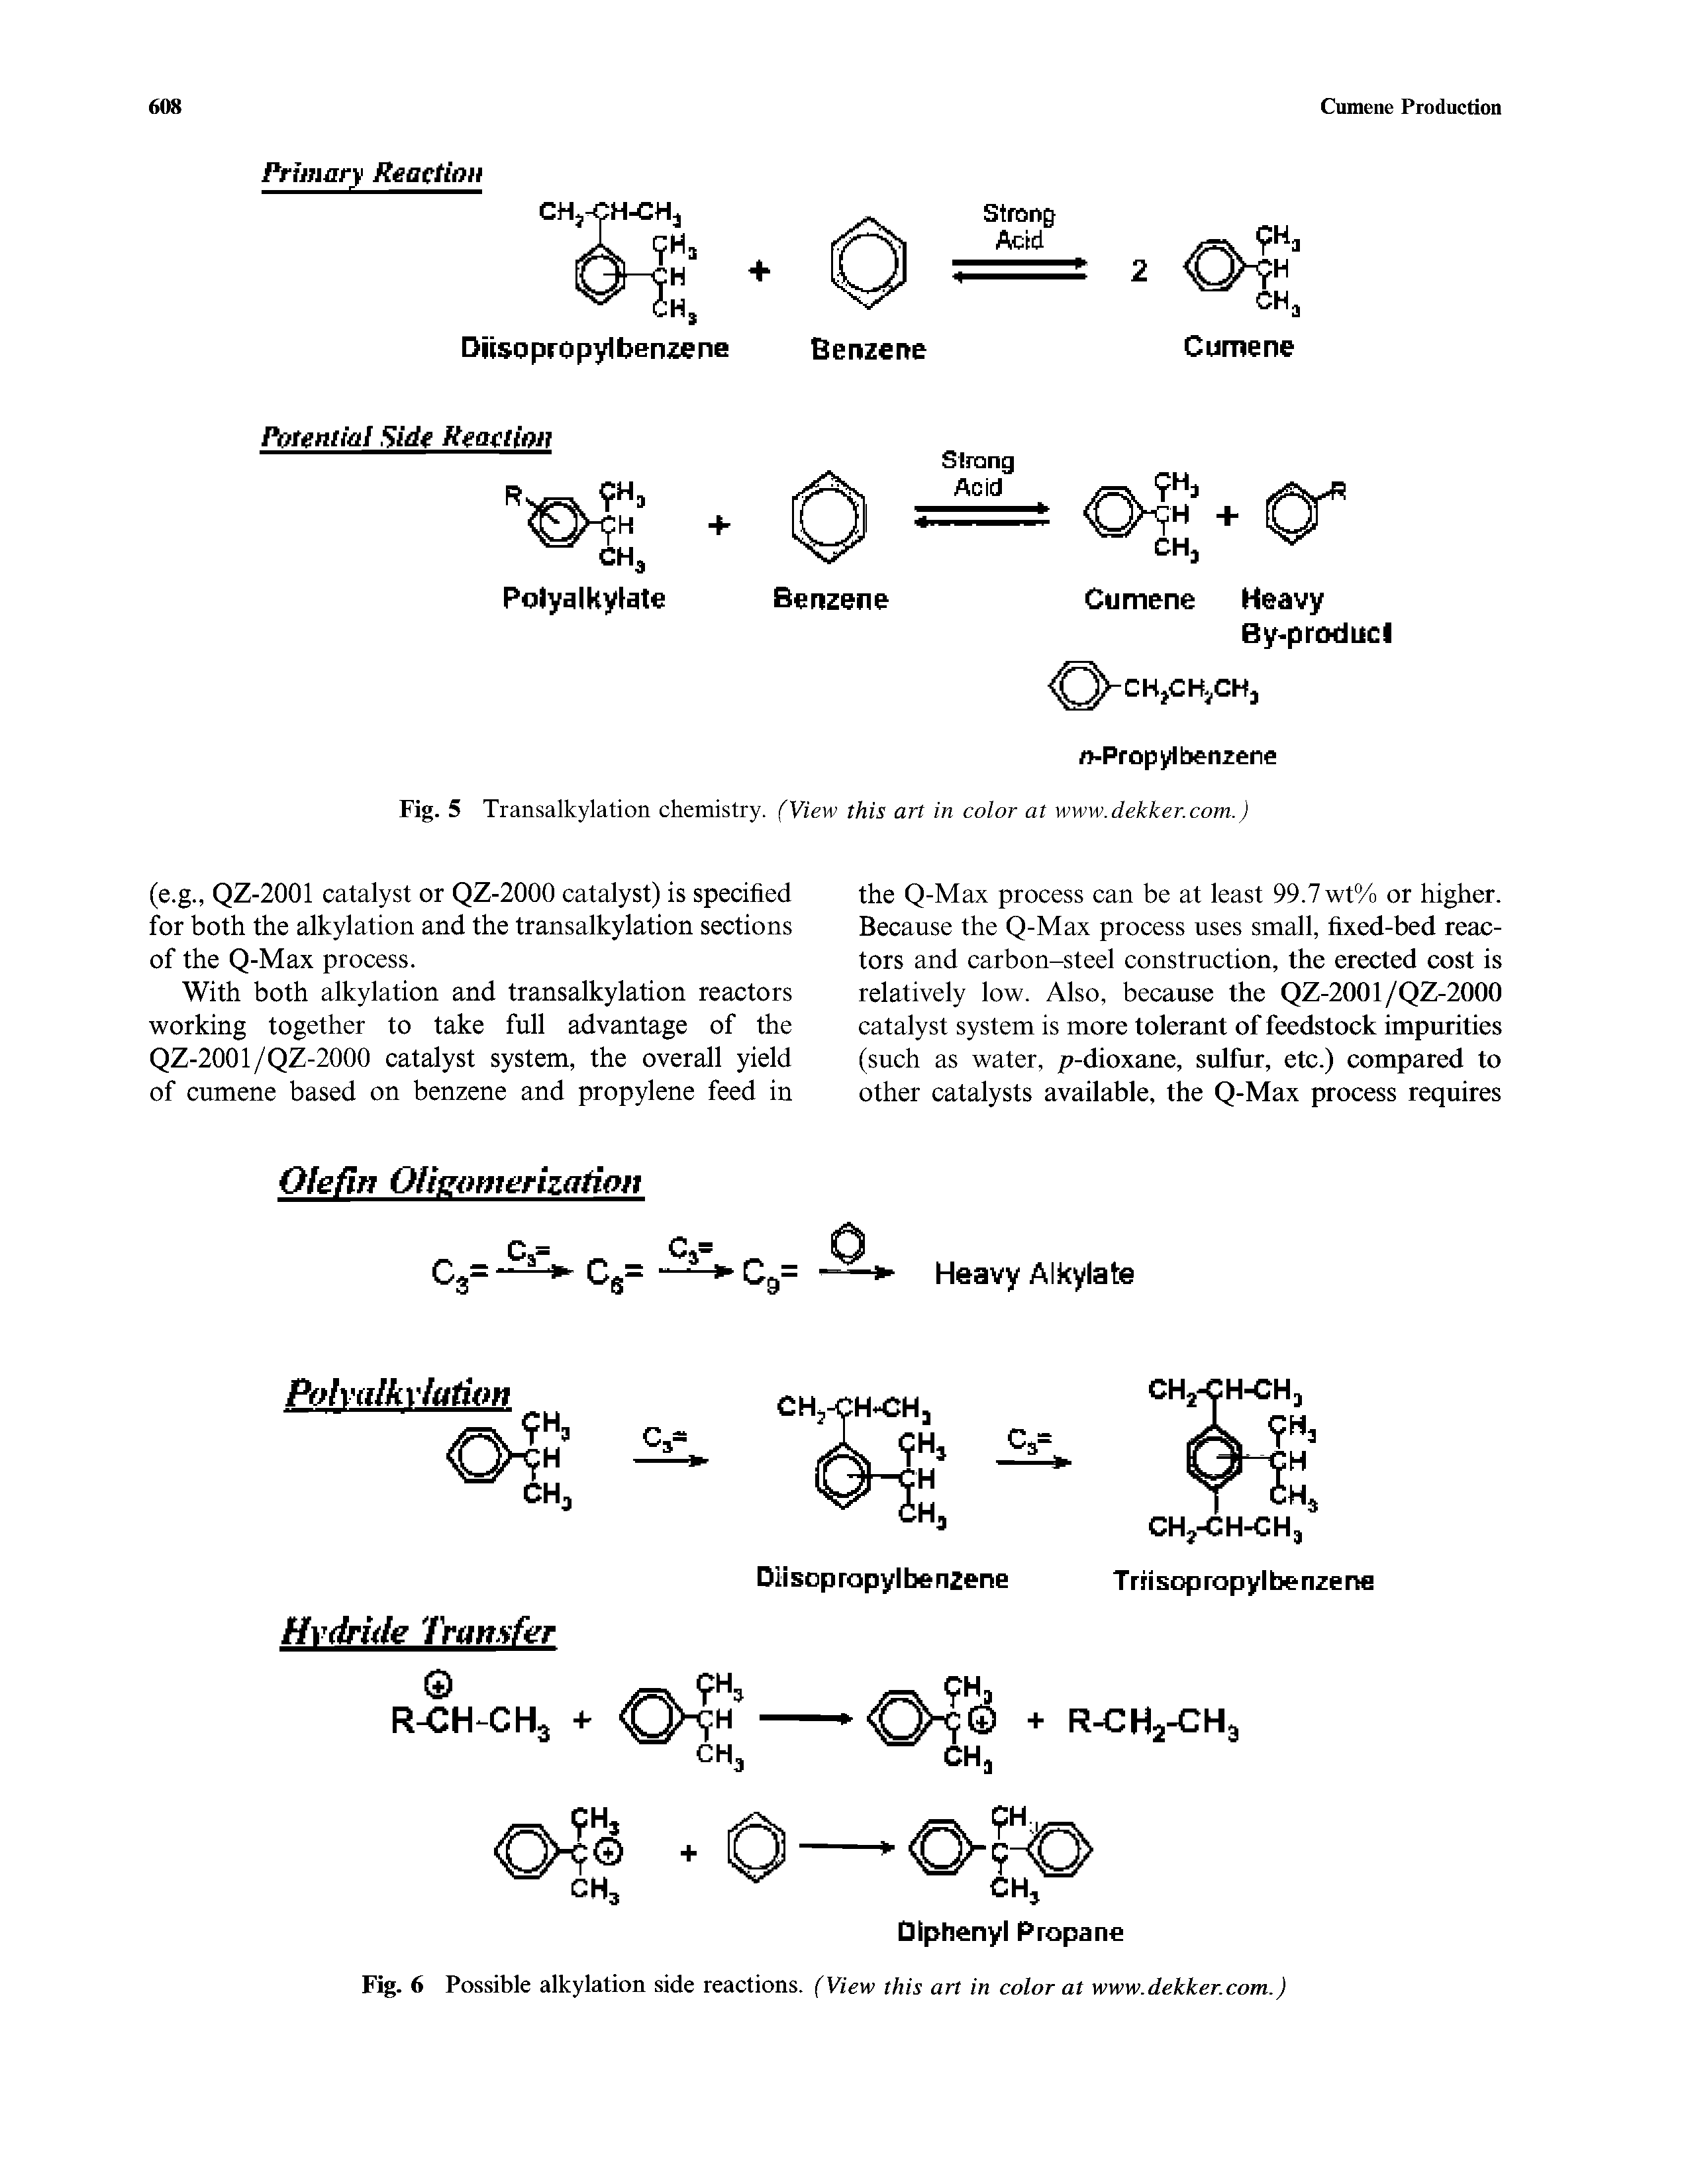 Fig. 6 Possible alkylation side reactions. (View this art in color at www.dekker.com.)...